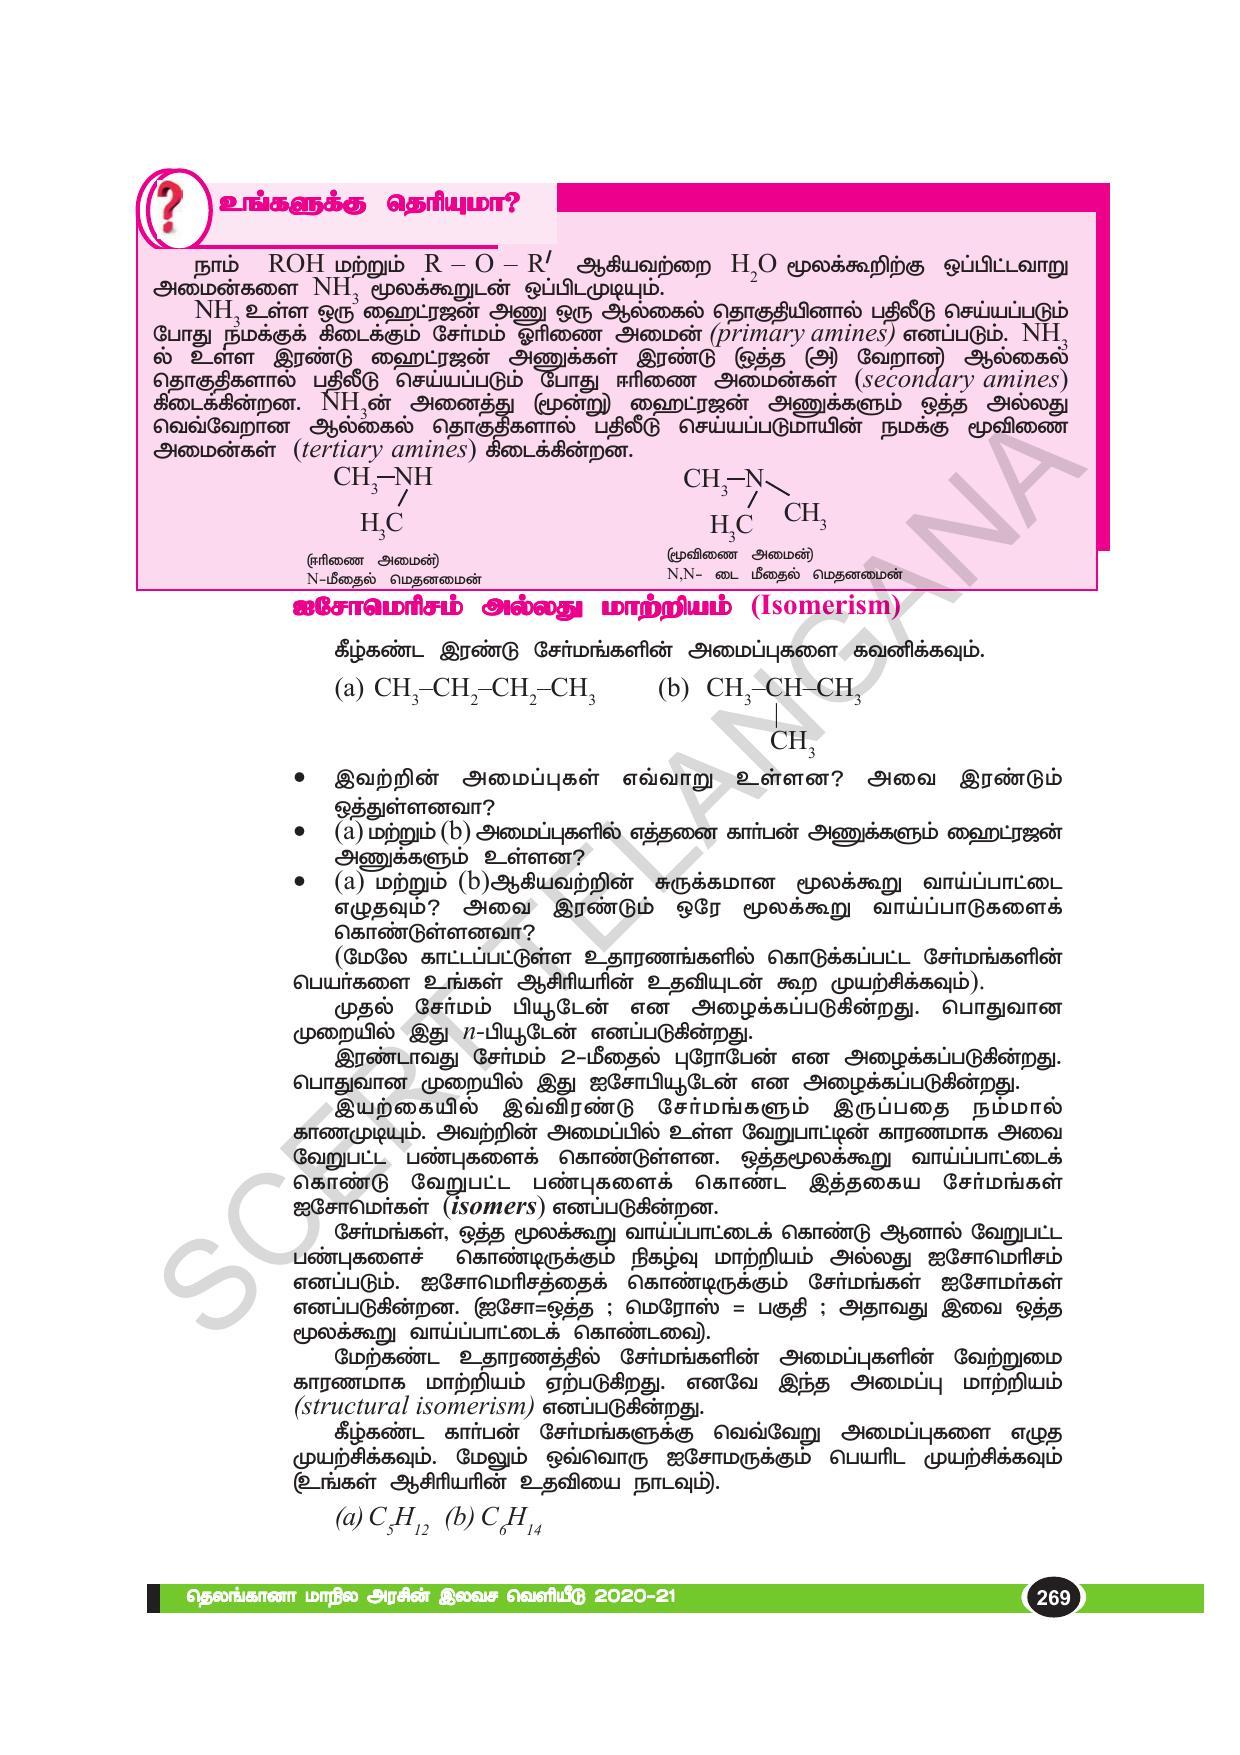 TS SCERT Class 10 Physical Science(Tamil Medium) Text Book - Page 281